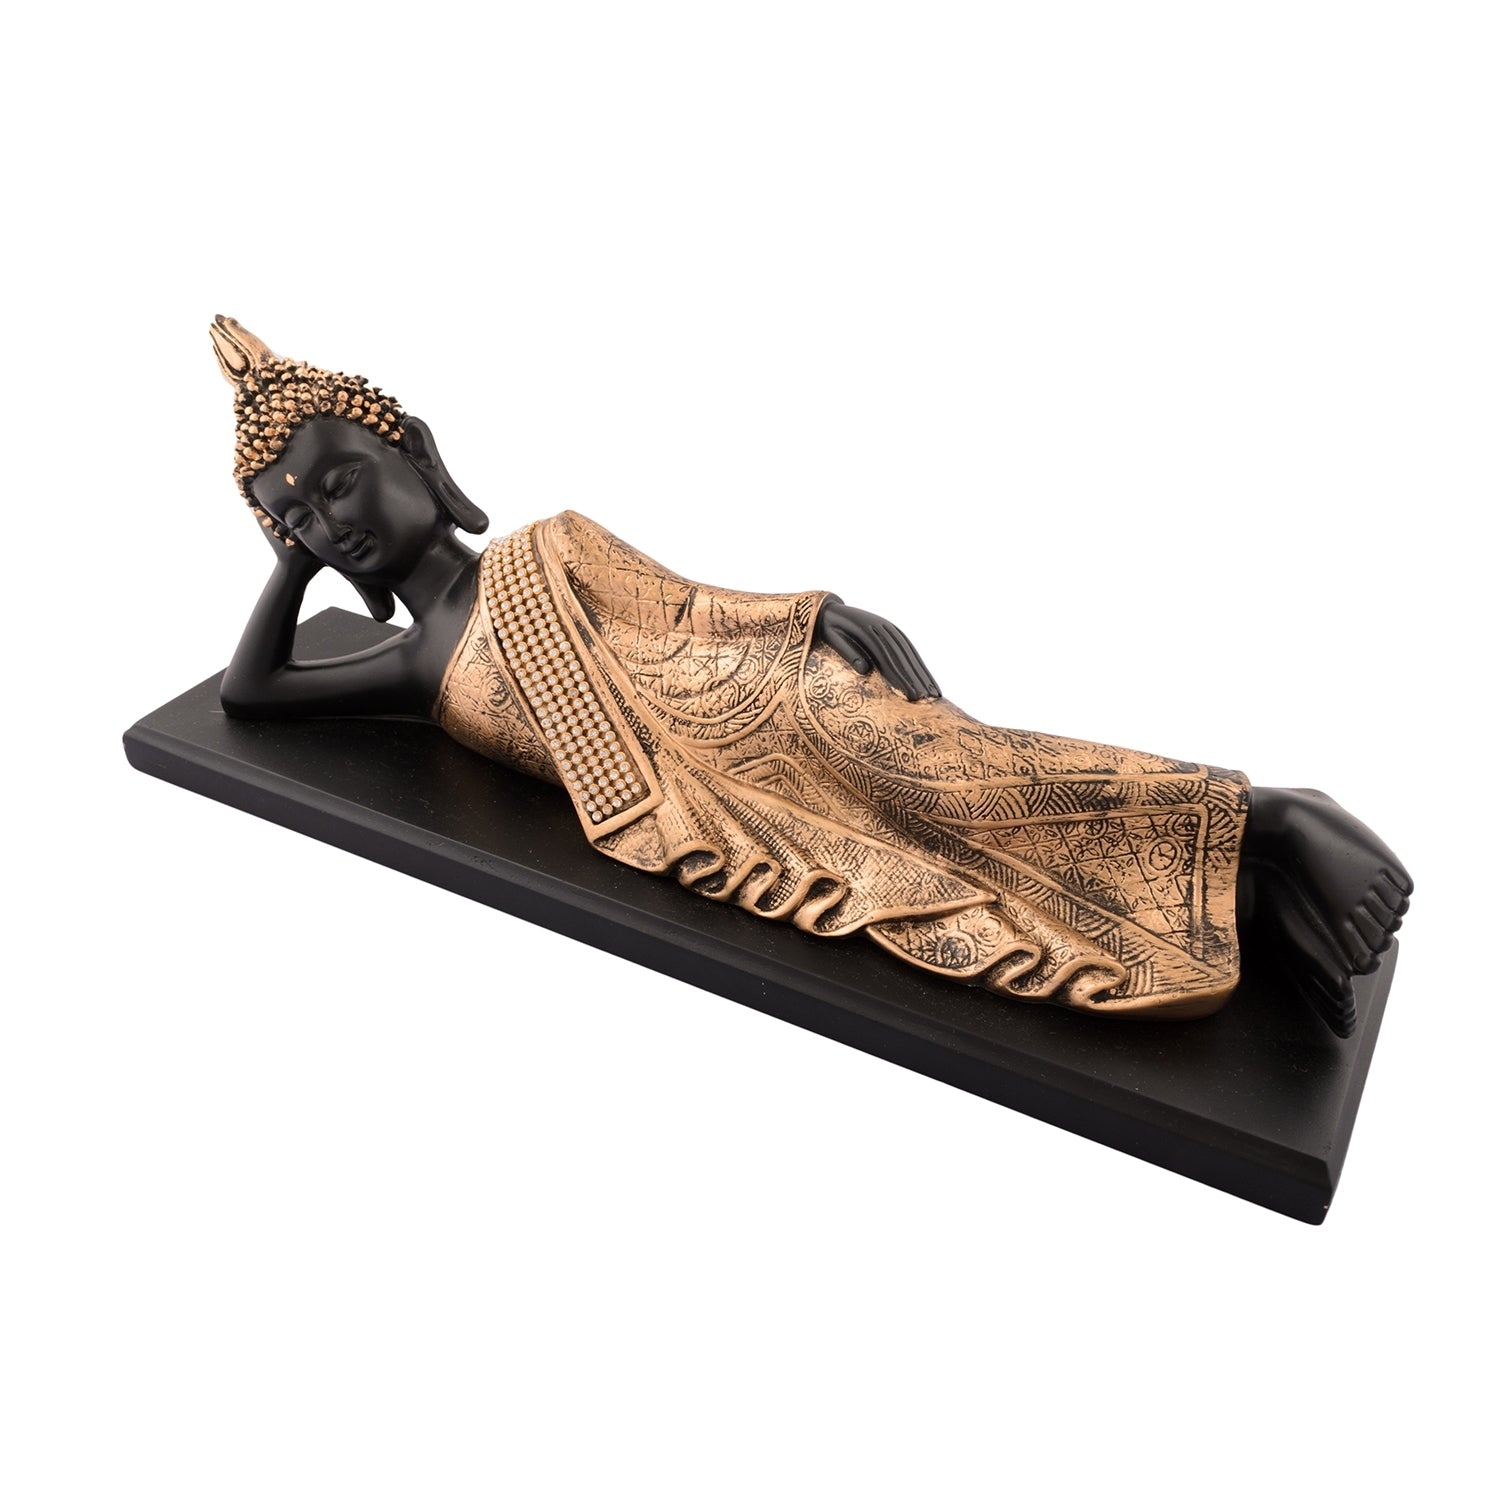 Polyresin Black and golden Resting Buddha Statue on Wooden Board 2